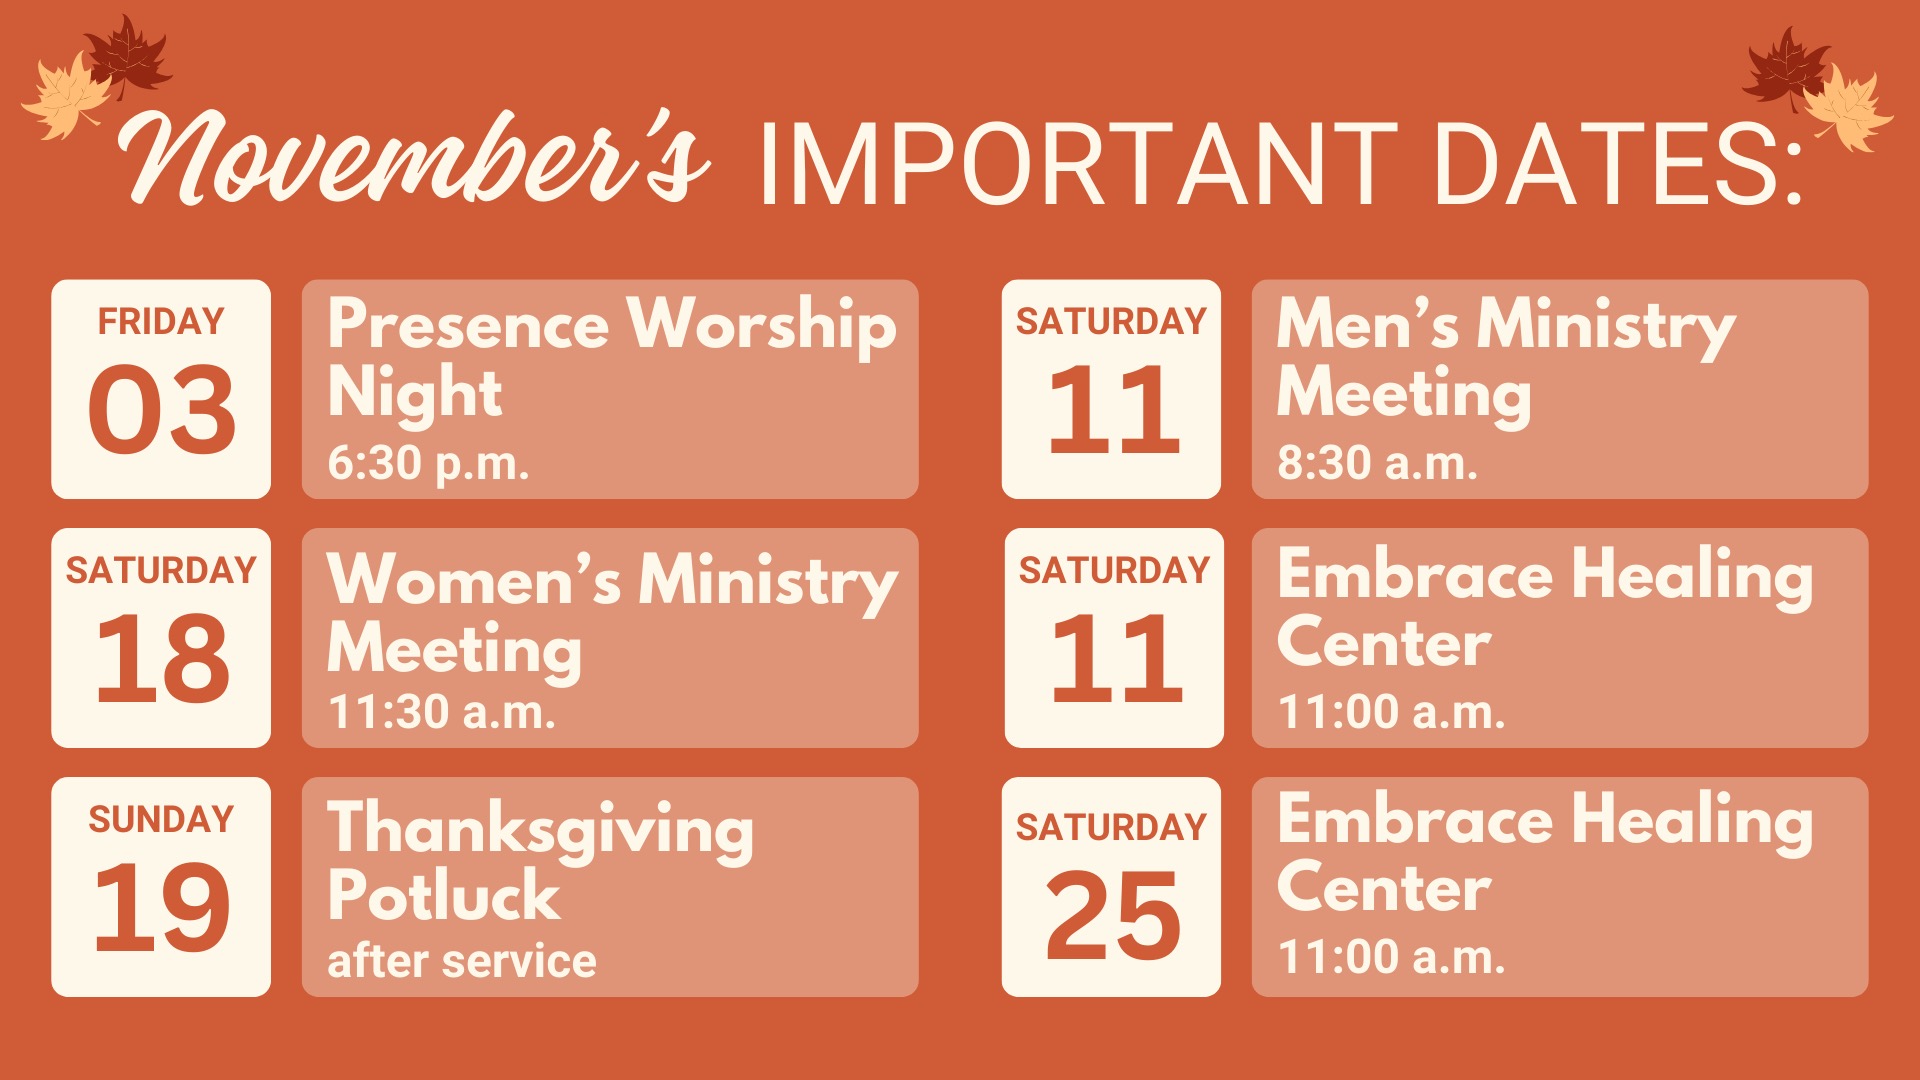 What’s Happening at Embrace in November